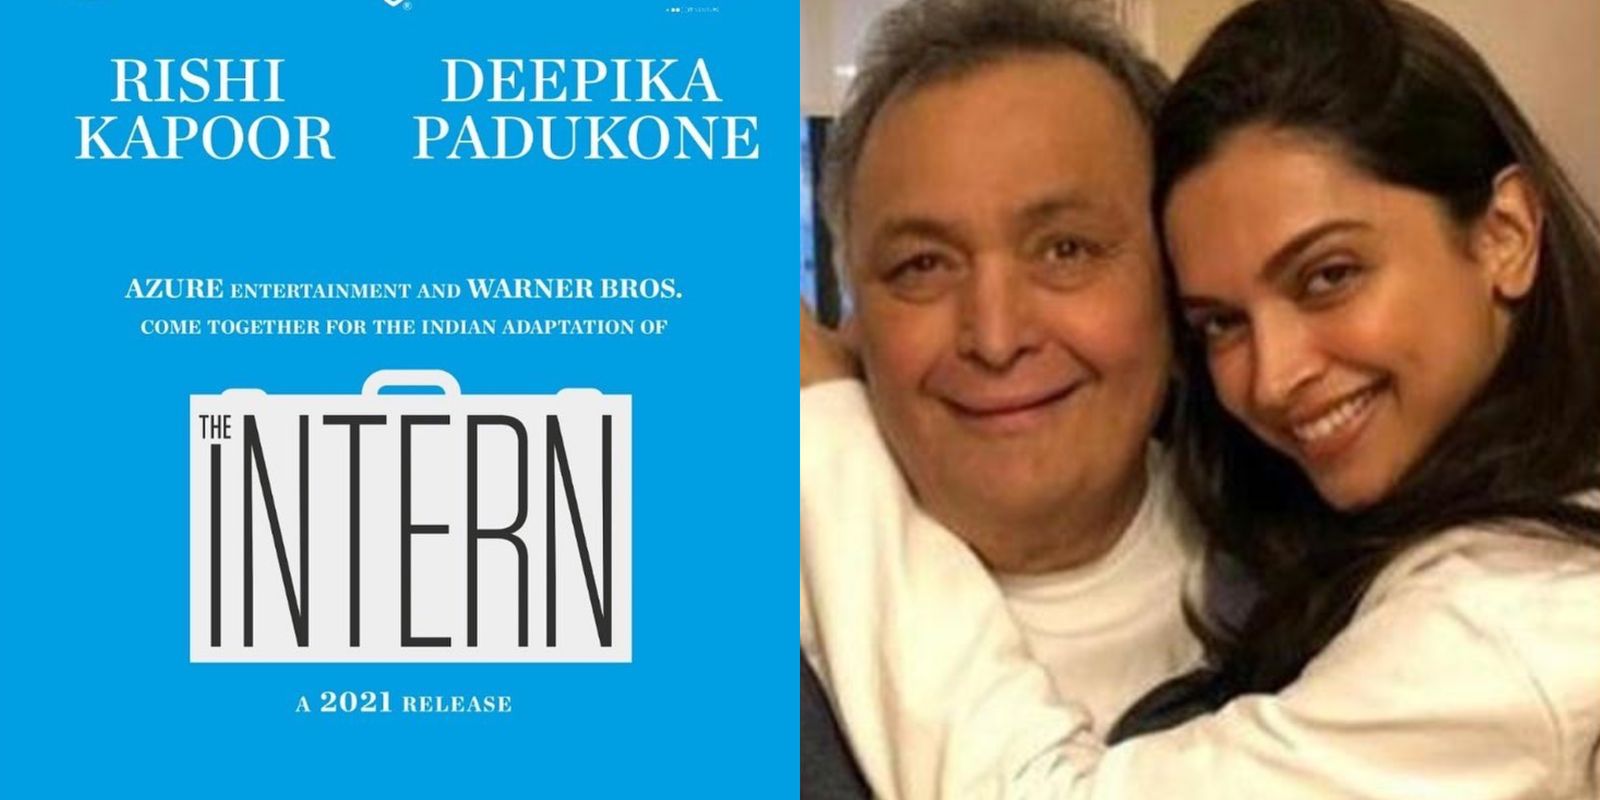 Deepika Padukone And Rishi Kapoor To Star In The Indian Remake Of Anne Hathaway's The Intern, Film To release In 2021